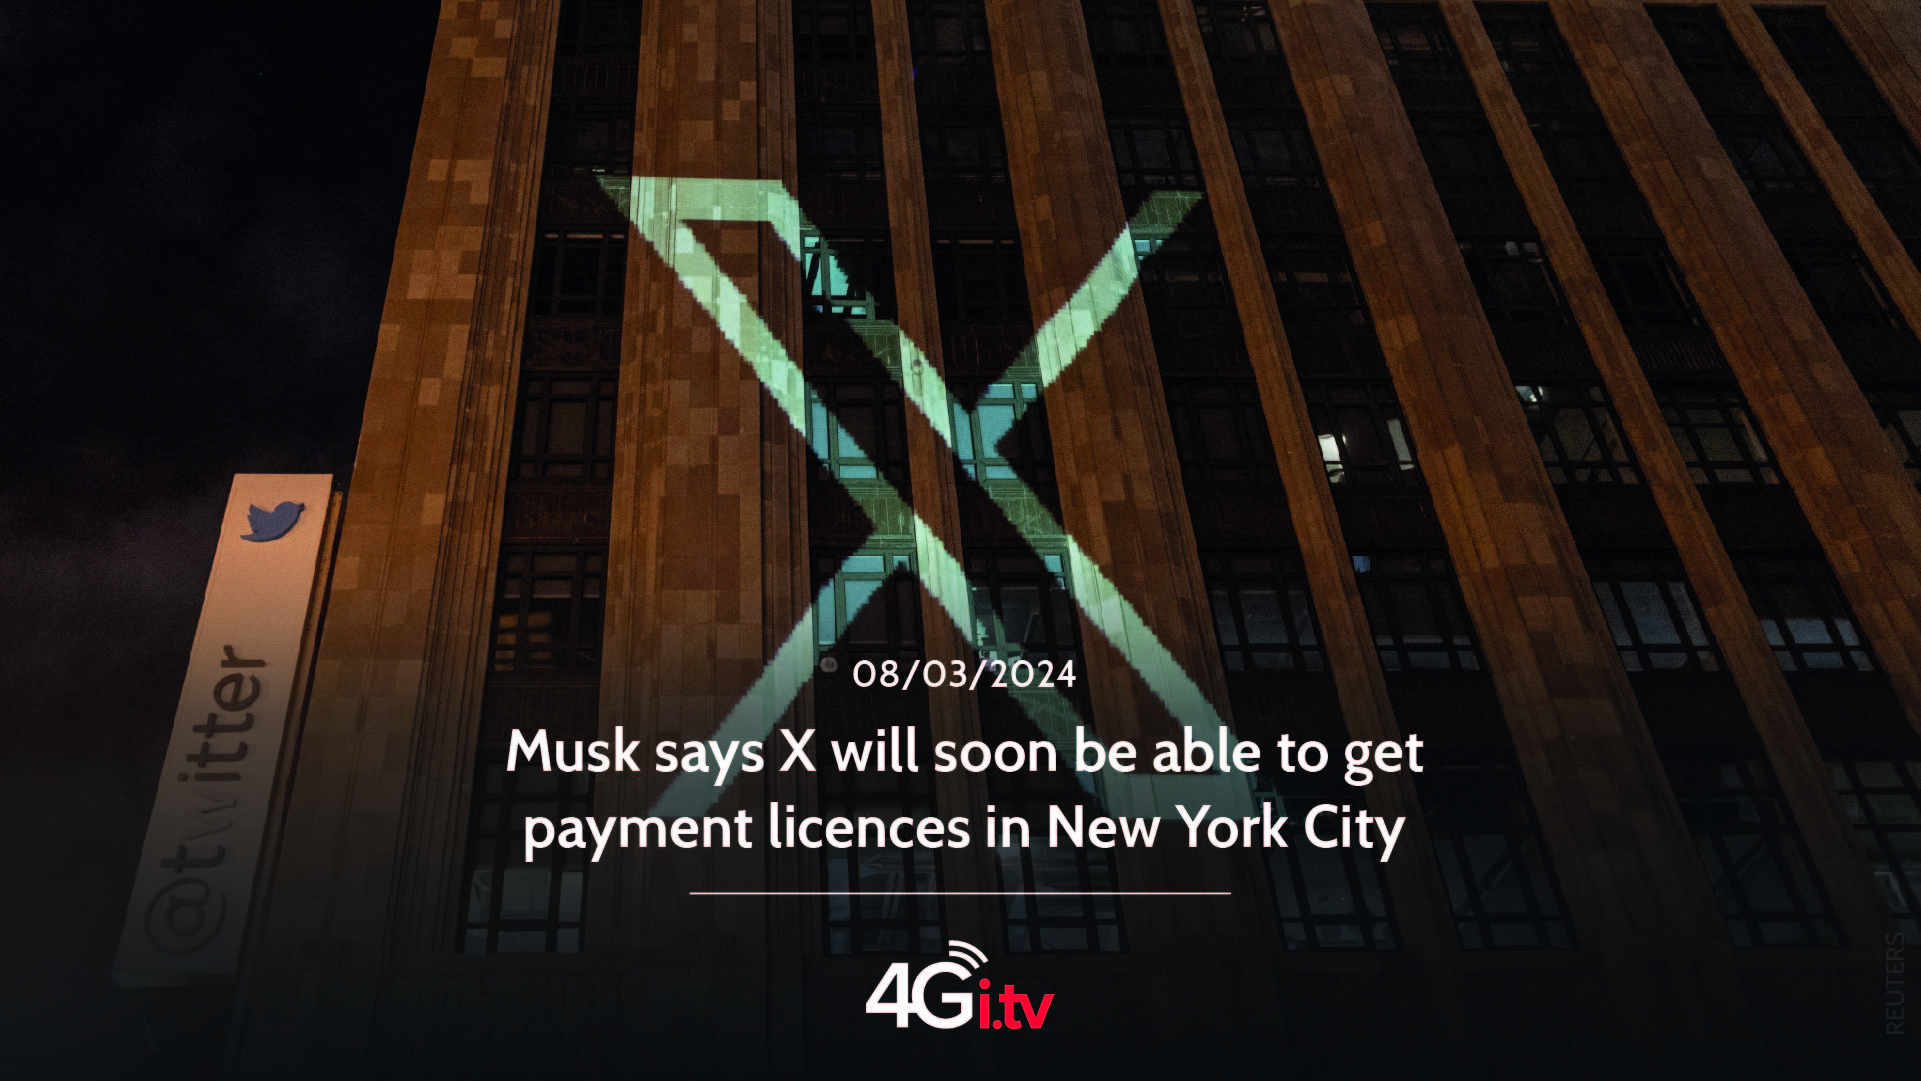 Lesen Sie mehr über den Artikel Musk says X will soon be able to get payment licences in New York City